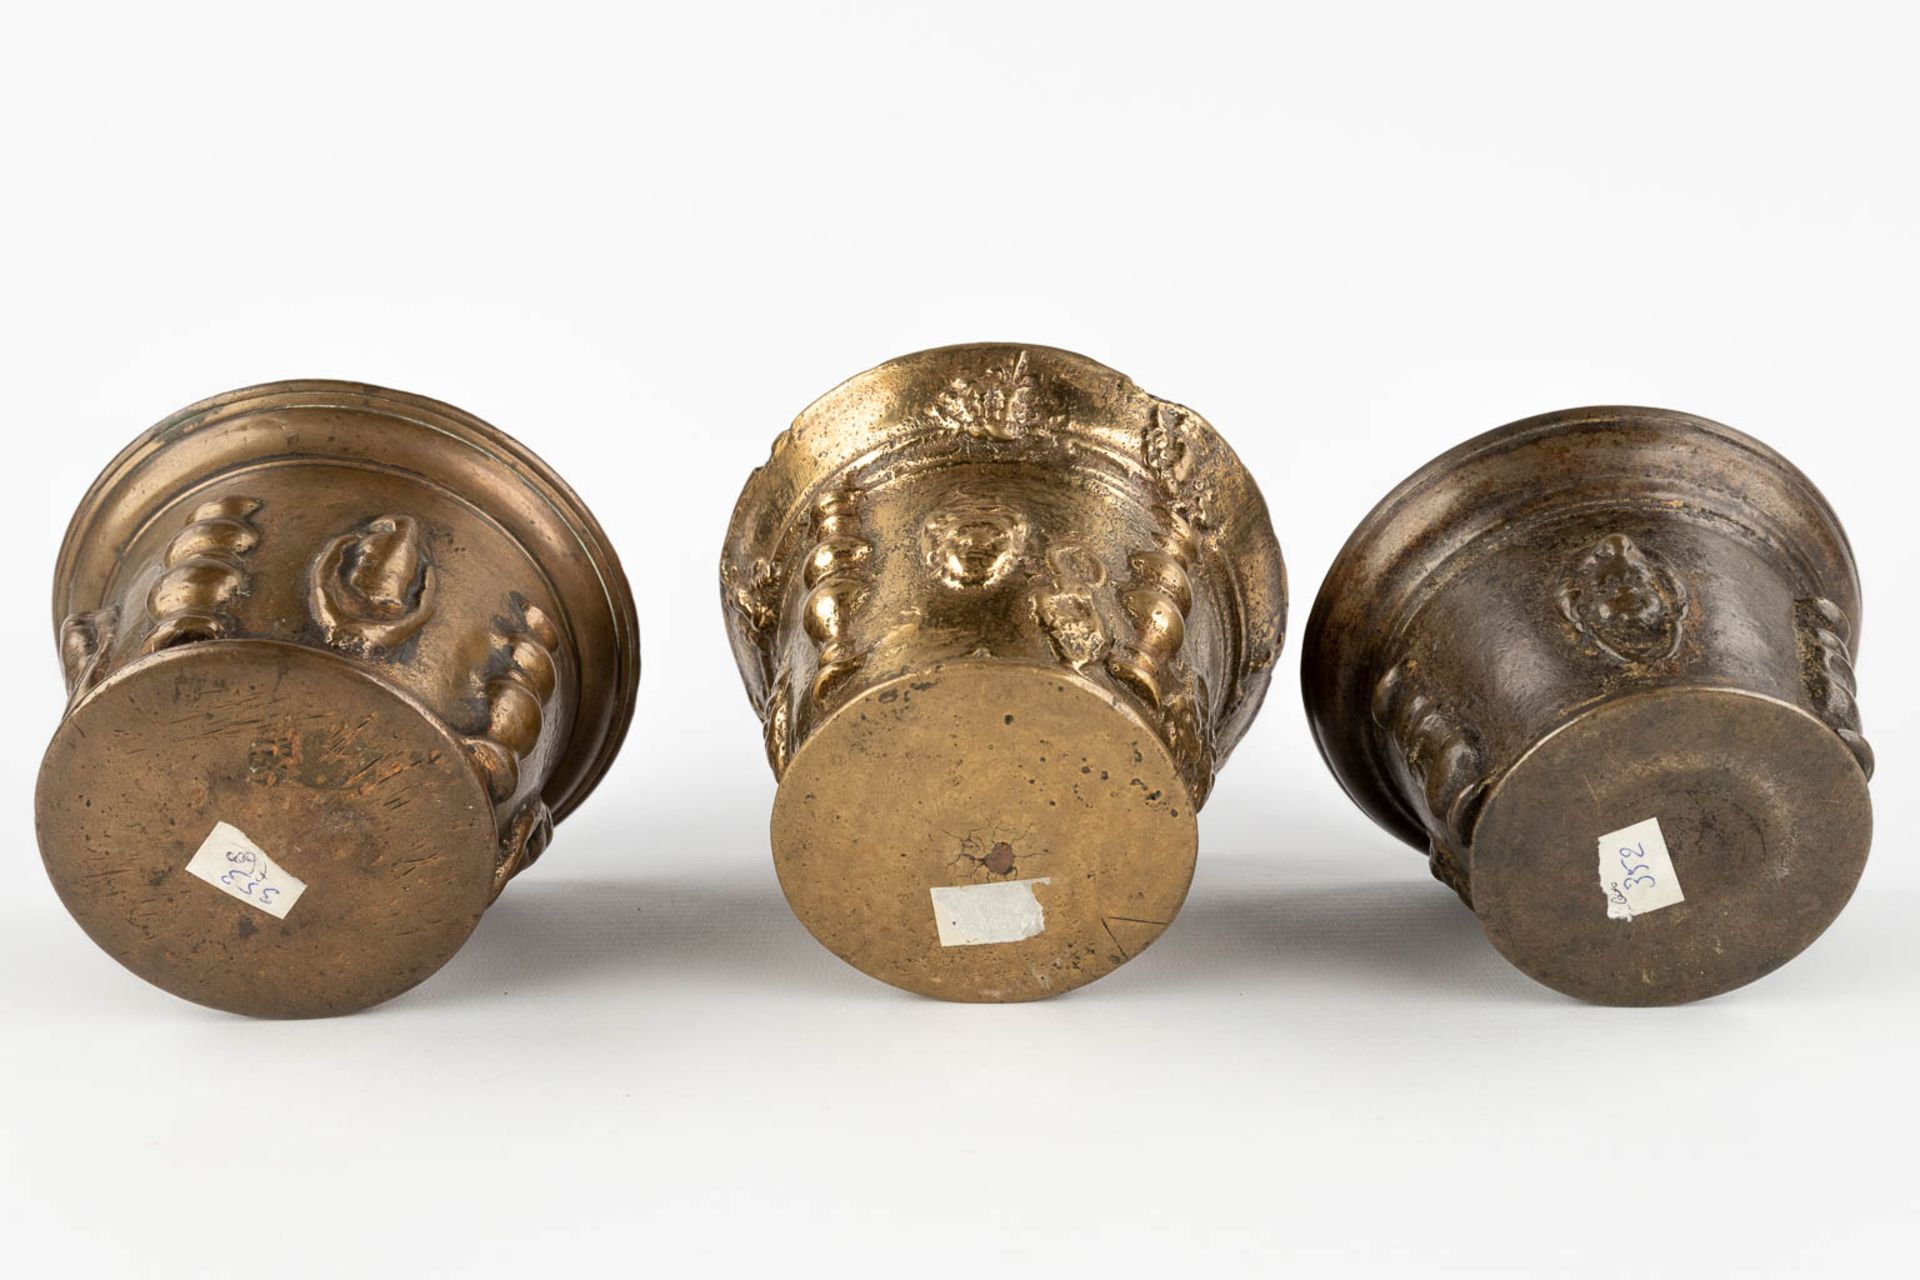 Three antique mortars with two pestles, bronze. Probably Spain, 17th/18th C. (H:9 x D:13 cm) - Image 8 of 12